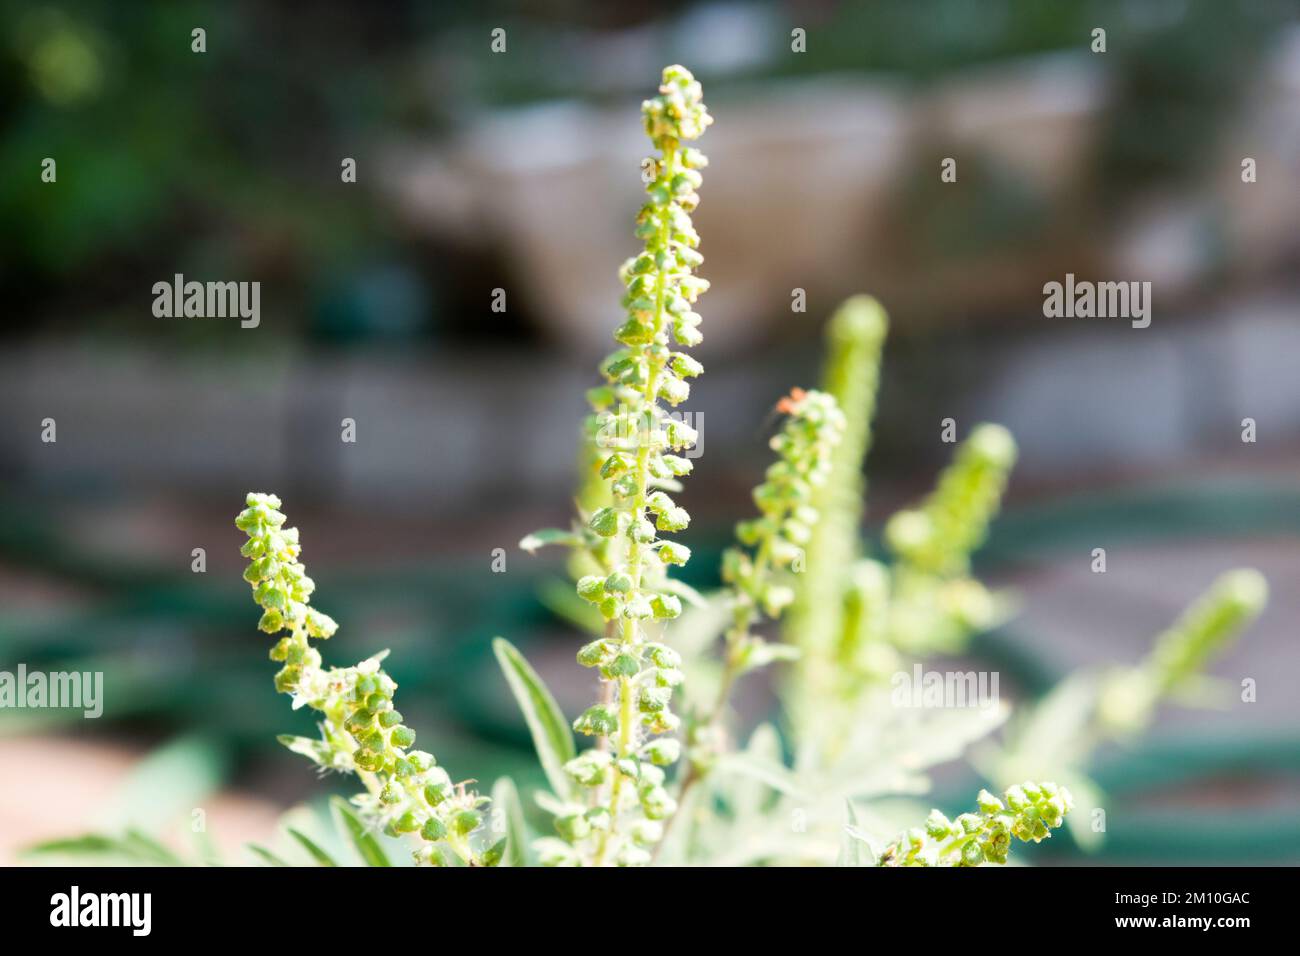 Close up photo of ragweed flowers. The ragweed pollen is notorious for causing allergic reactions in humans, specifically allergic rhinitis. Stock Photo